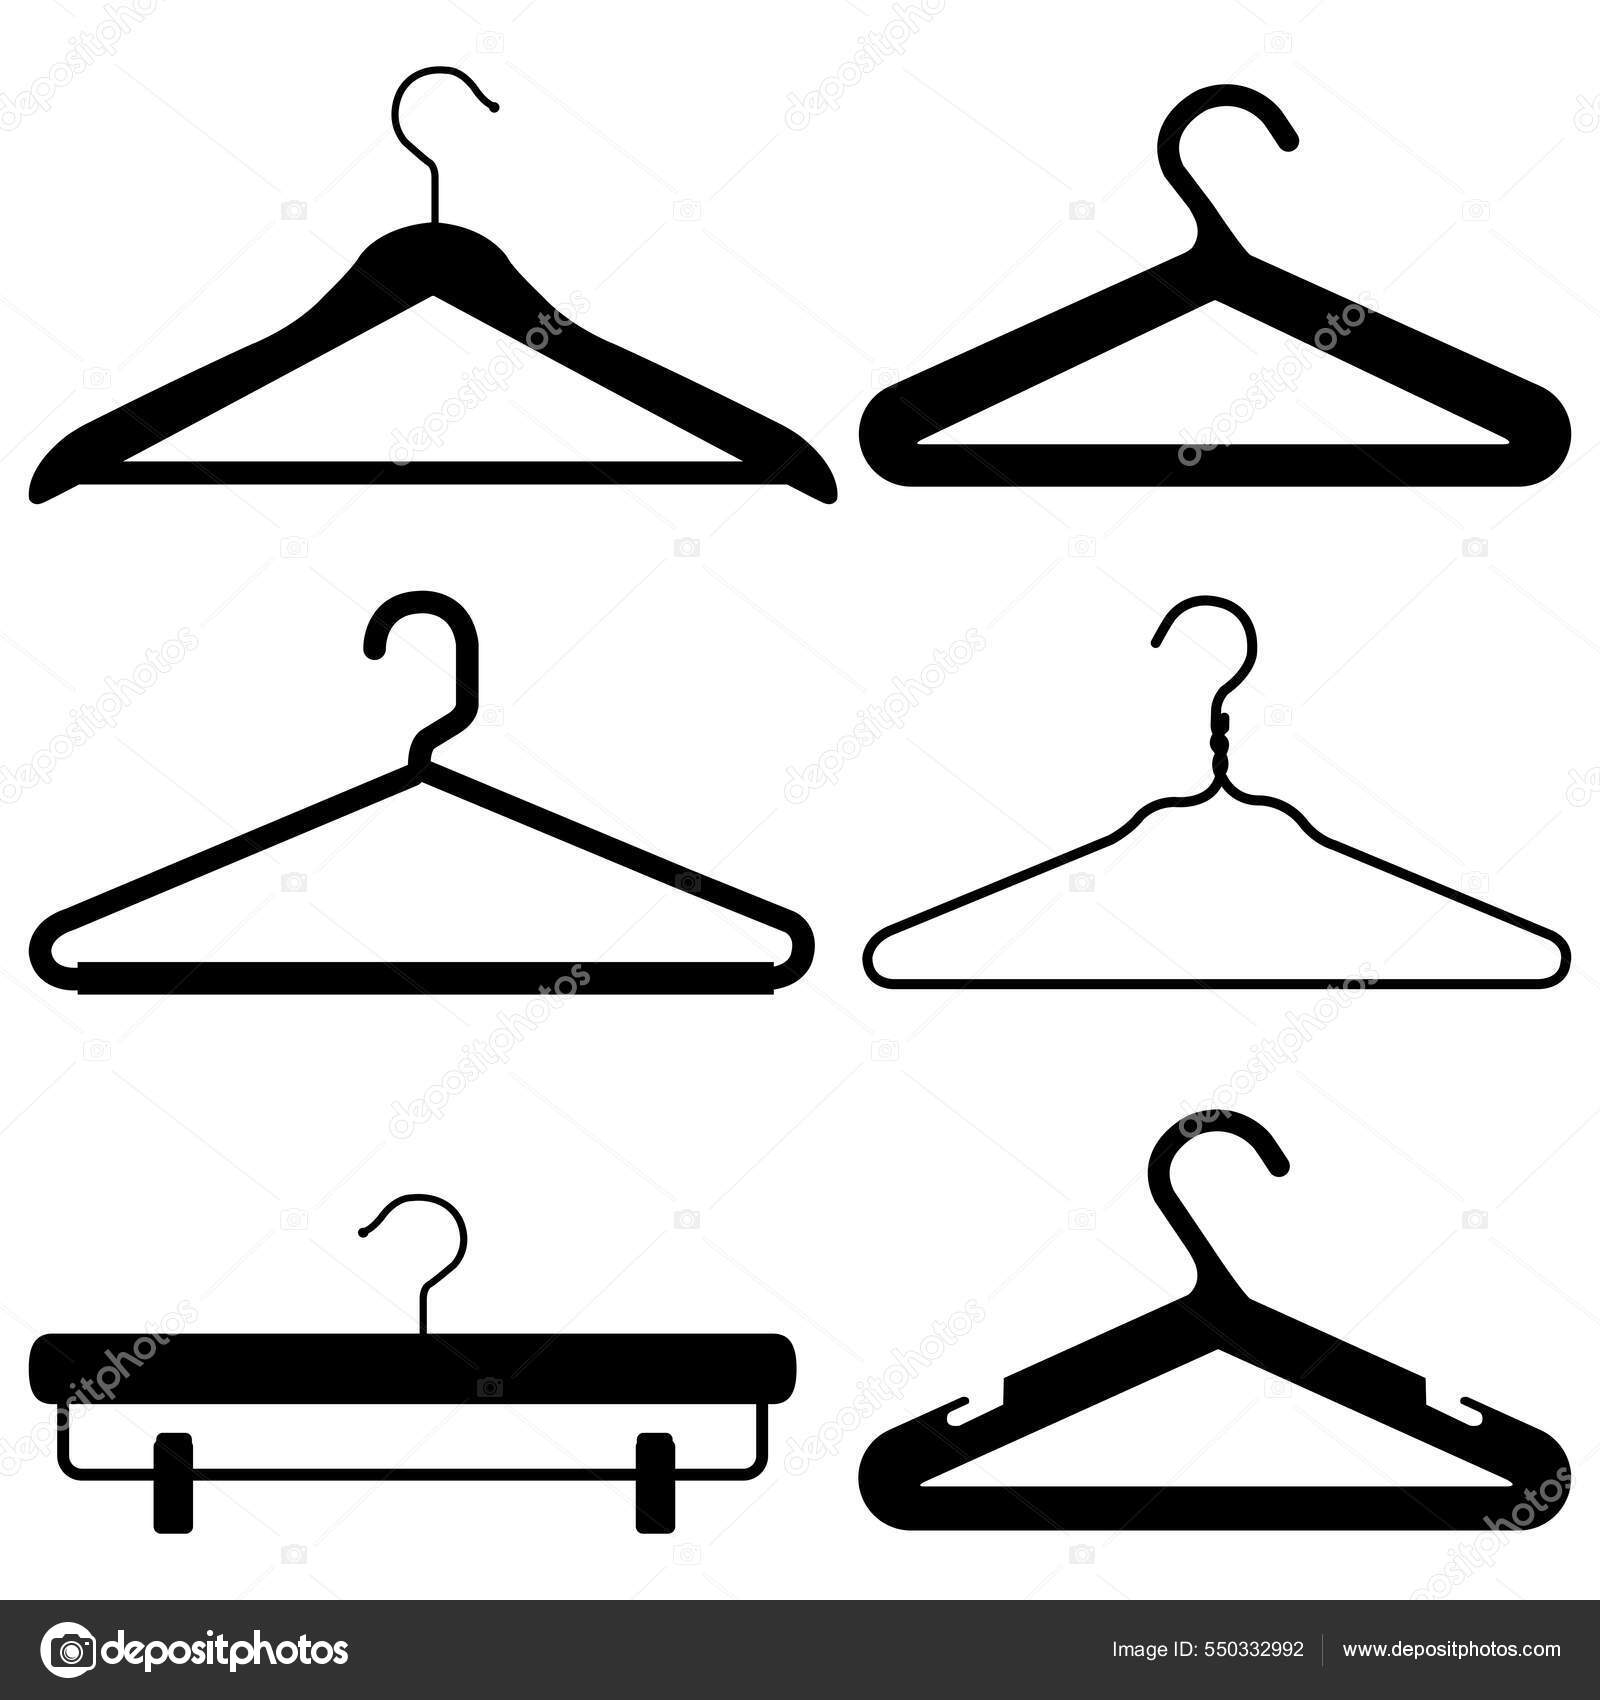 Clothes Hanger Silhouette Collection Stock Illustration - Download